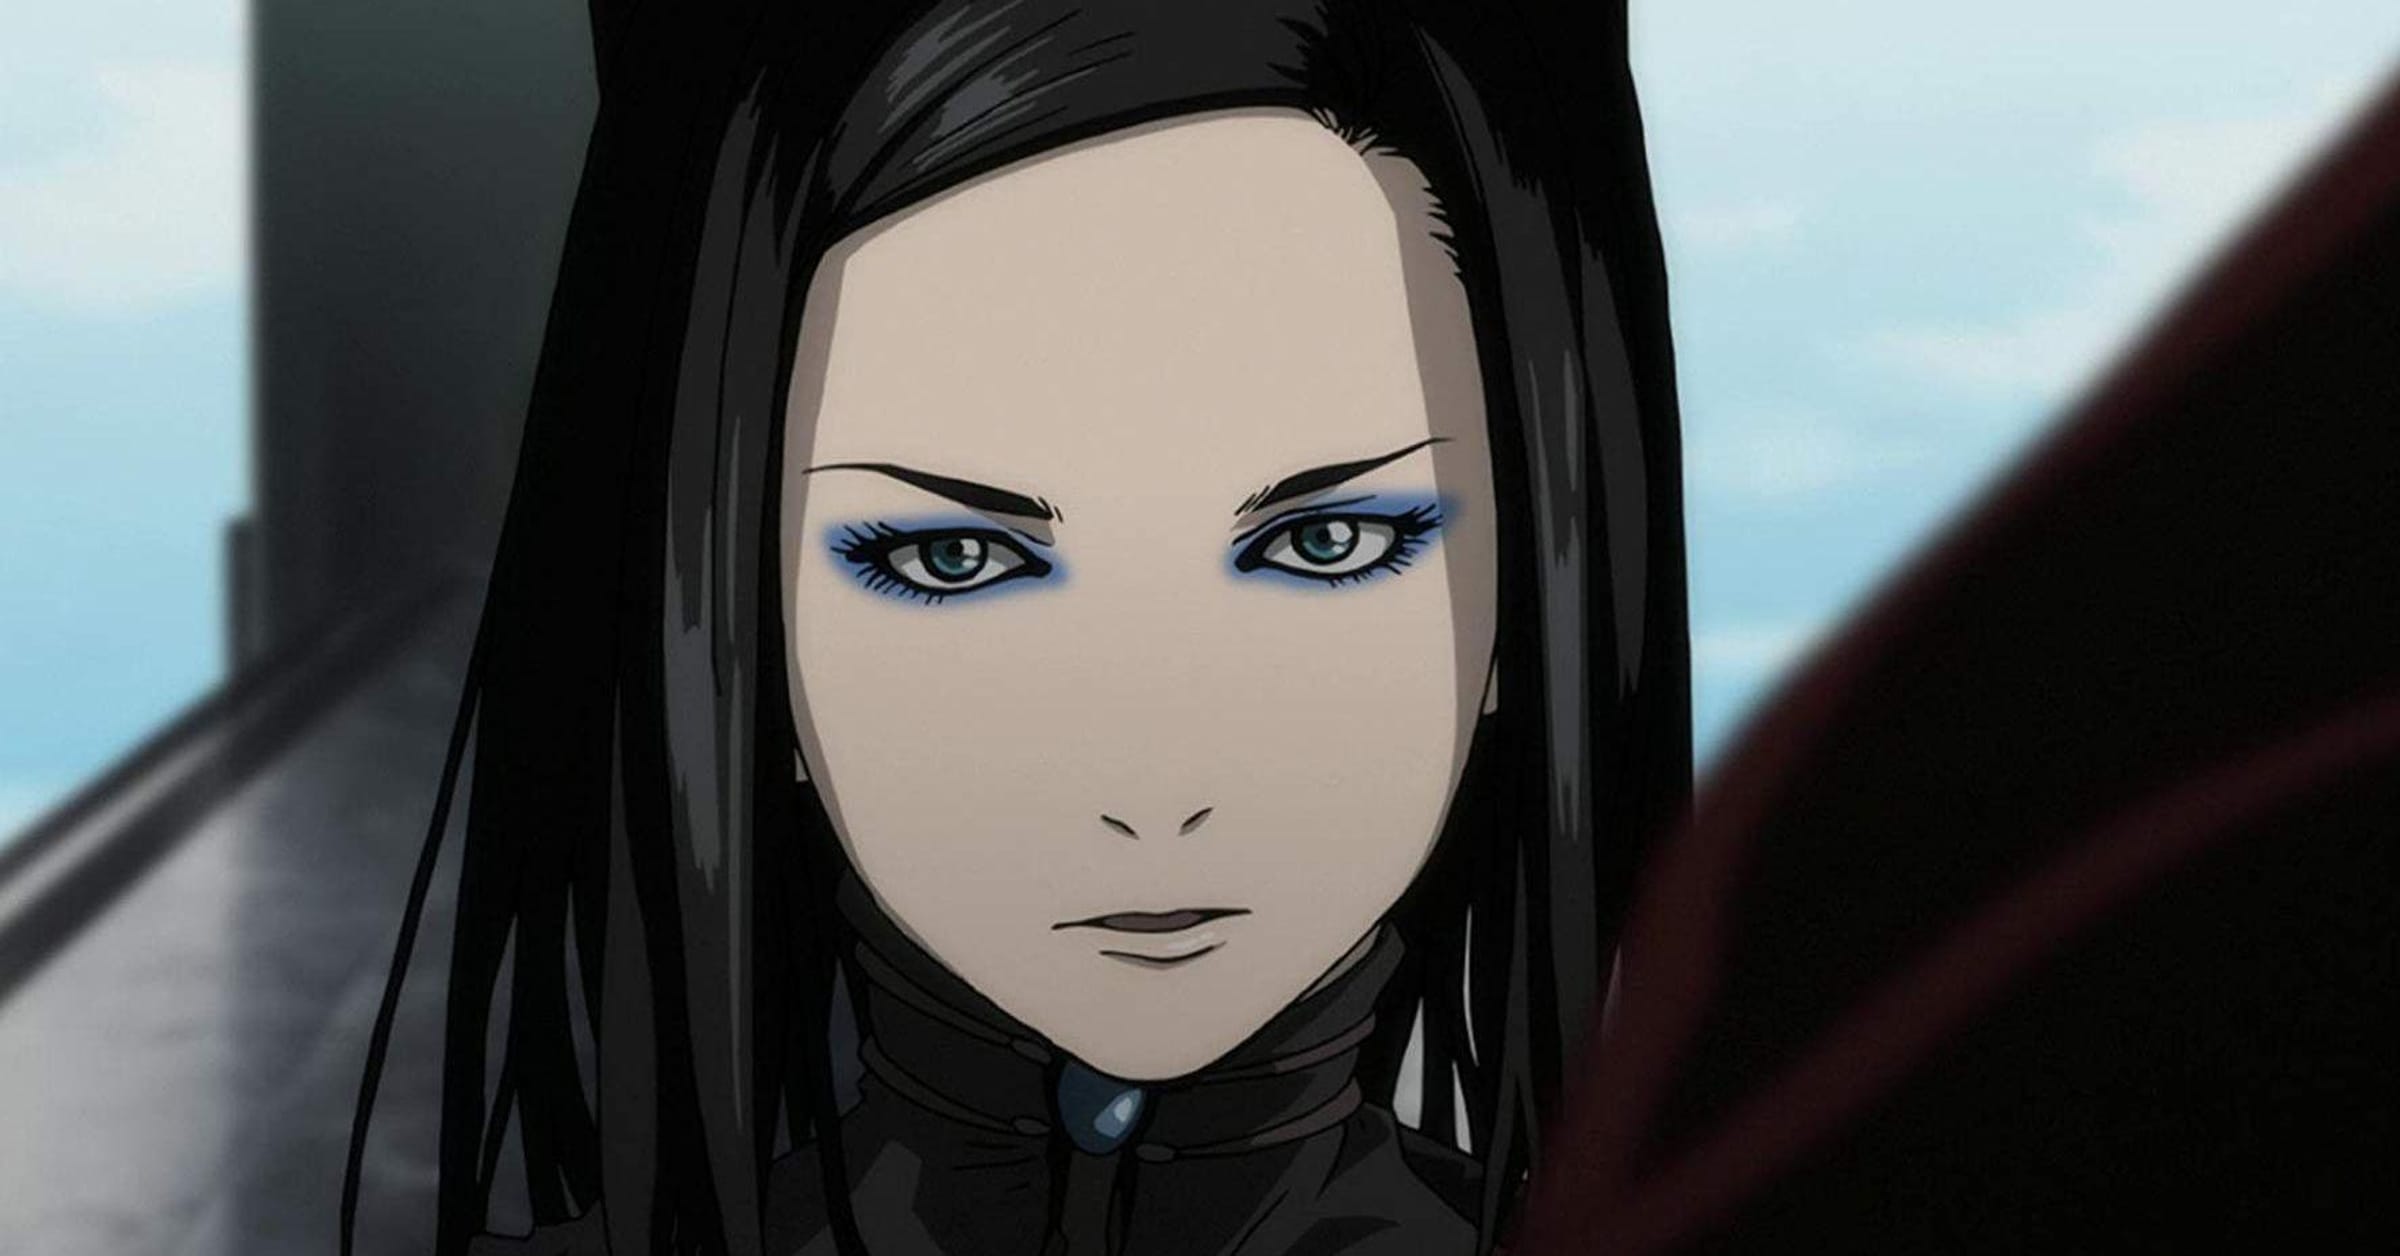 Ergo Proxy vs Serial Experiments Lain: Which is a better